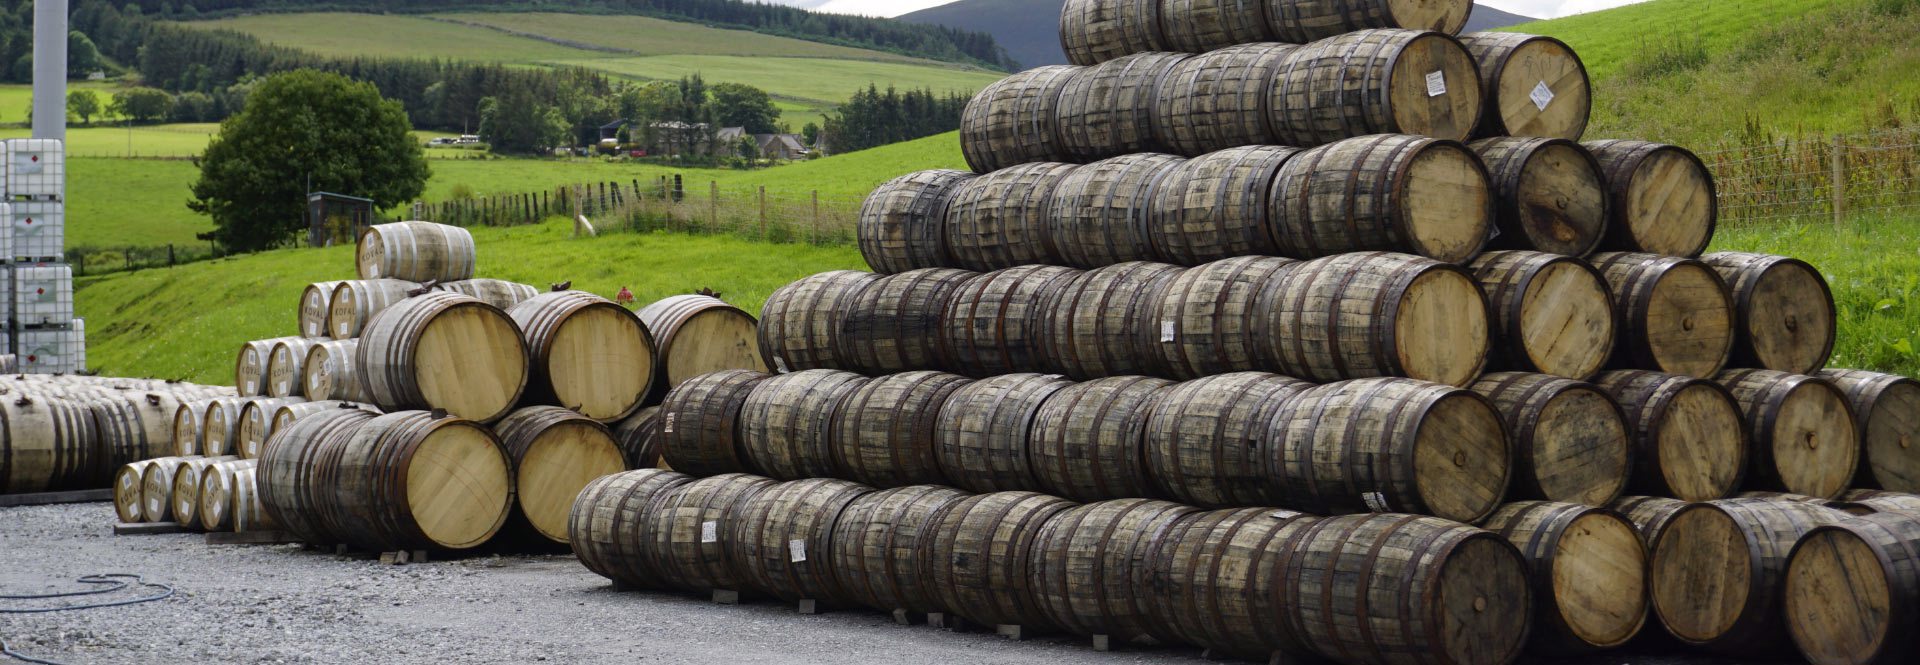 Buy A Barrel Of Whisky - Cask Trade